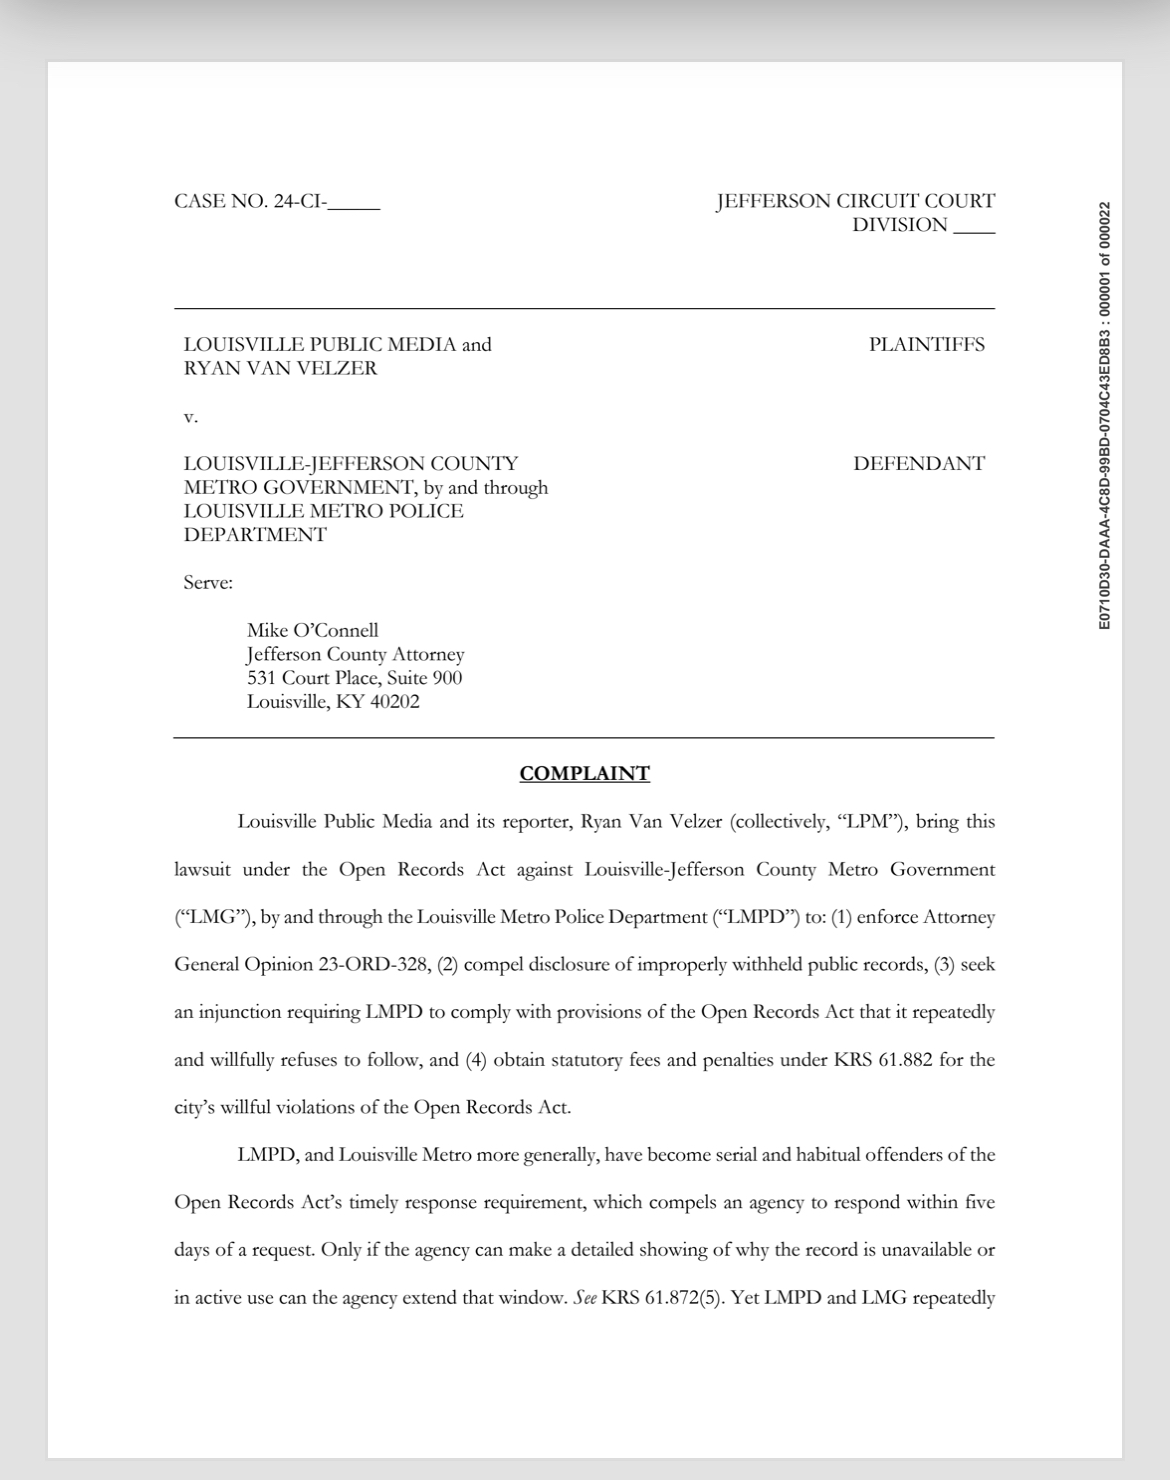 Page one of complaint in open records case filed by LPM